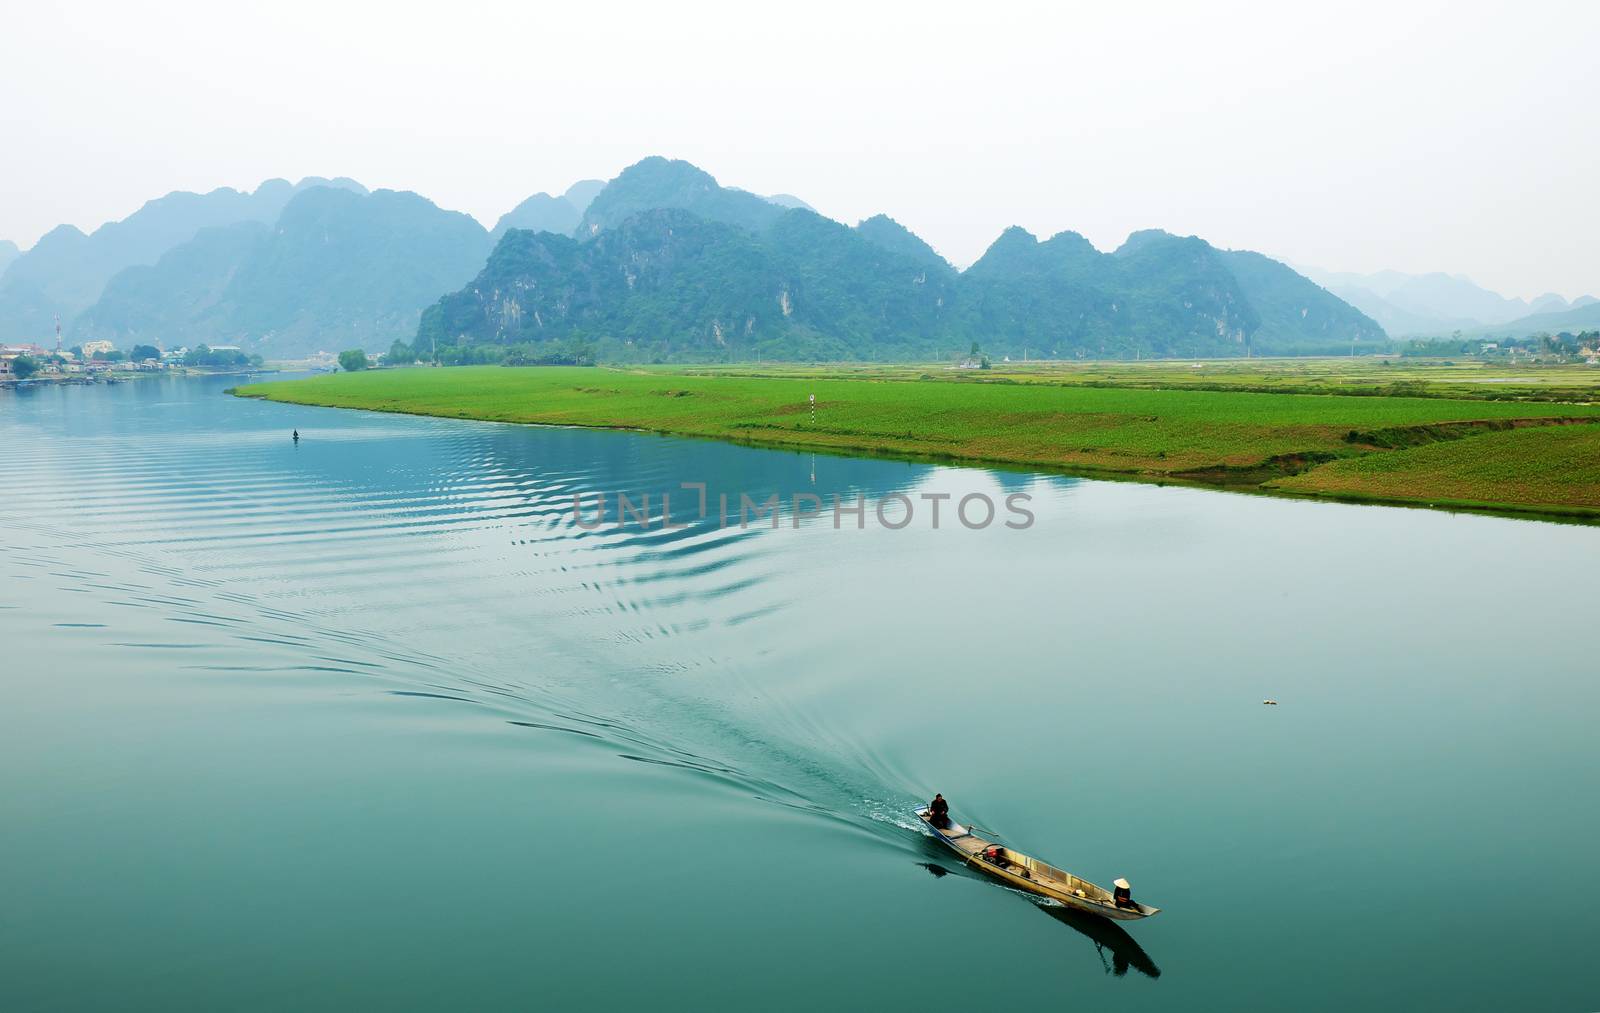 Amazing natural landscape at Quang Binh, Viet Nam by xuanhuongho